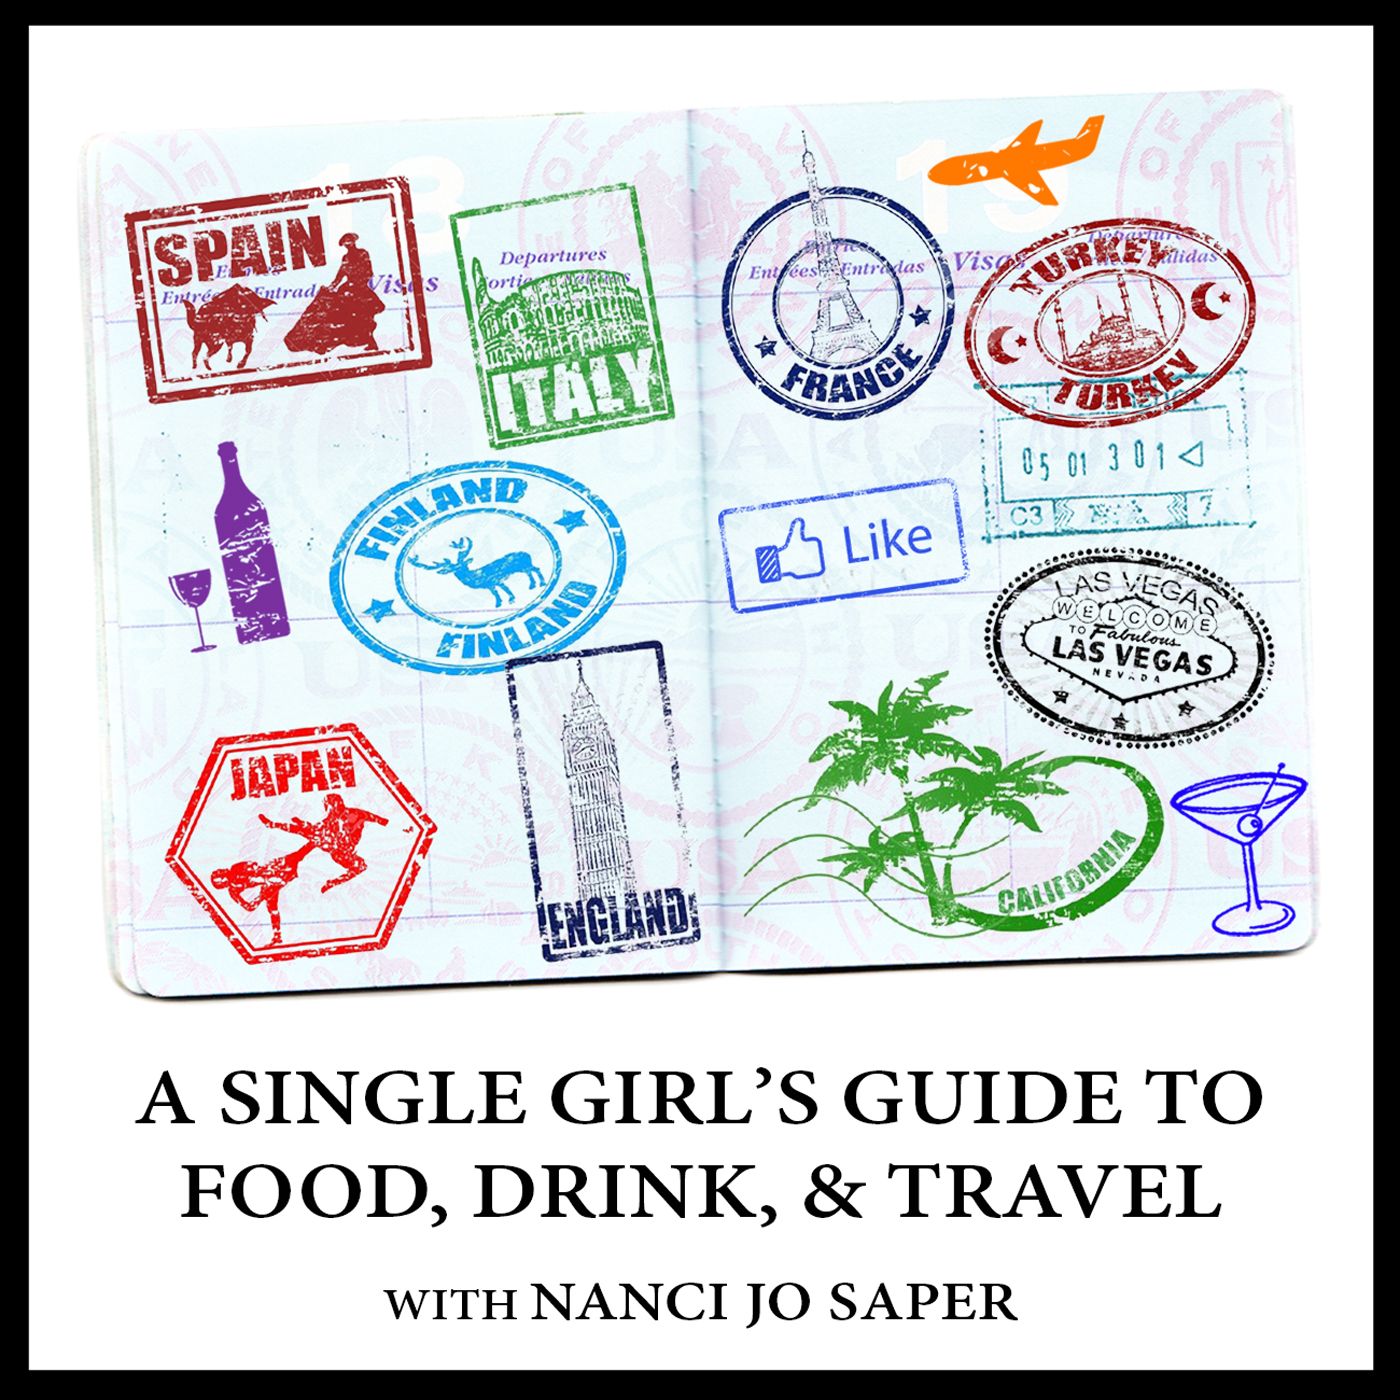 A Single Girl’s Guide to Food, Drink, & Travel